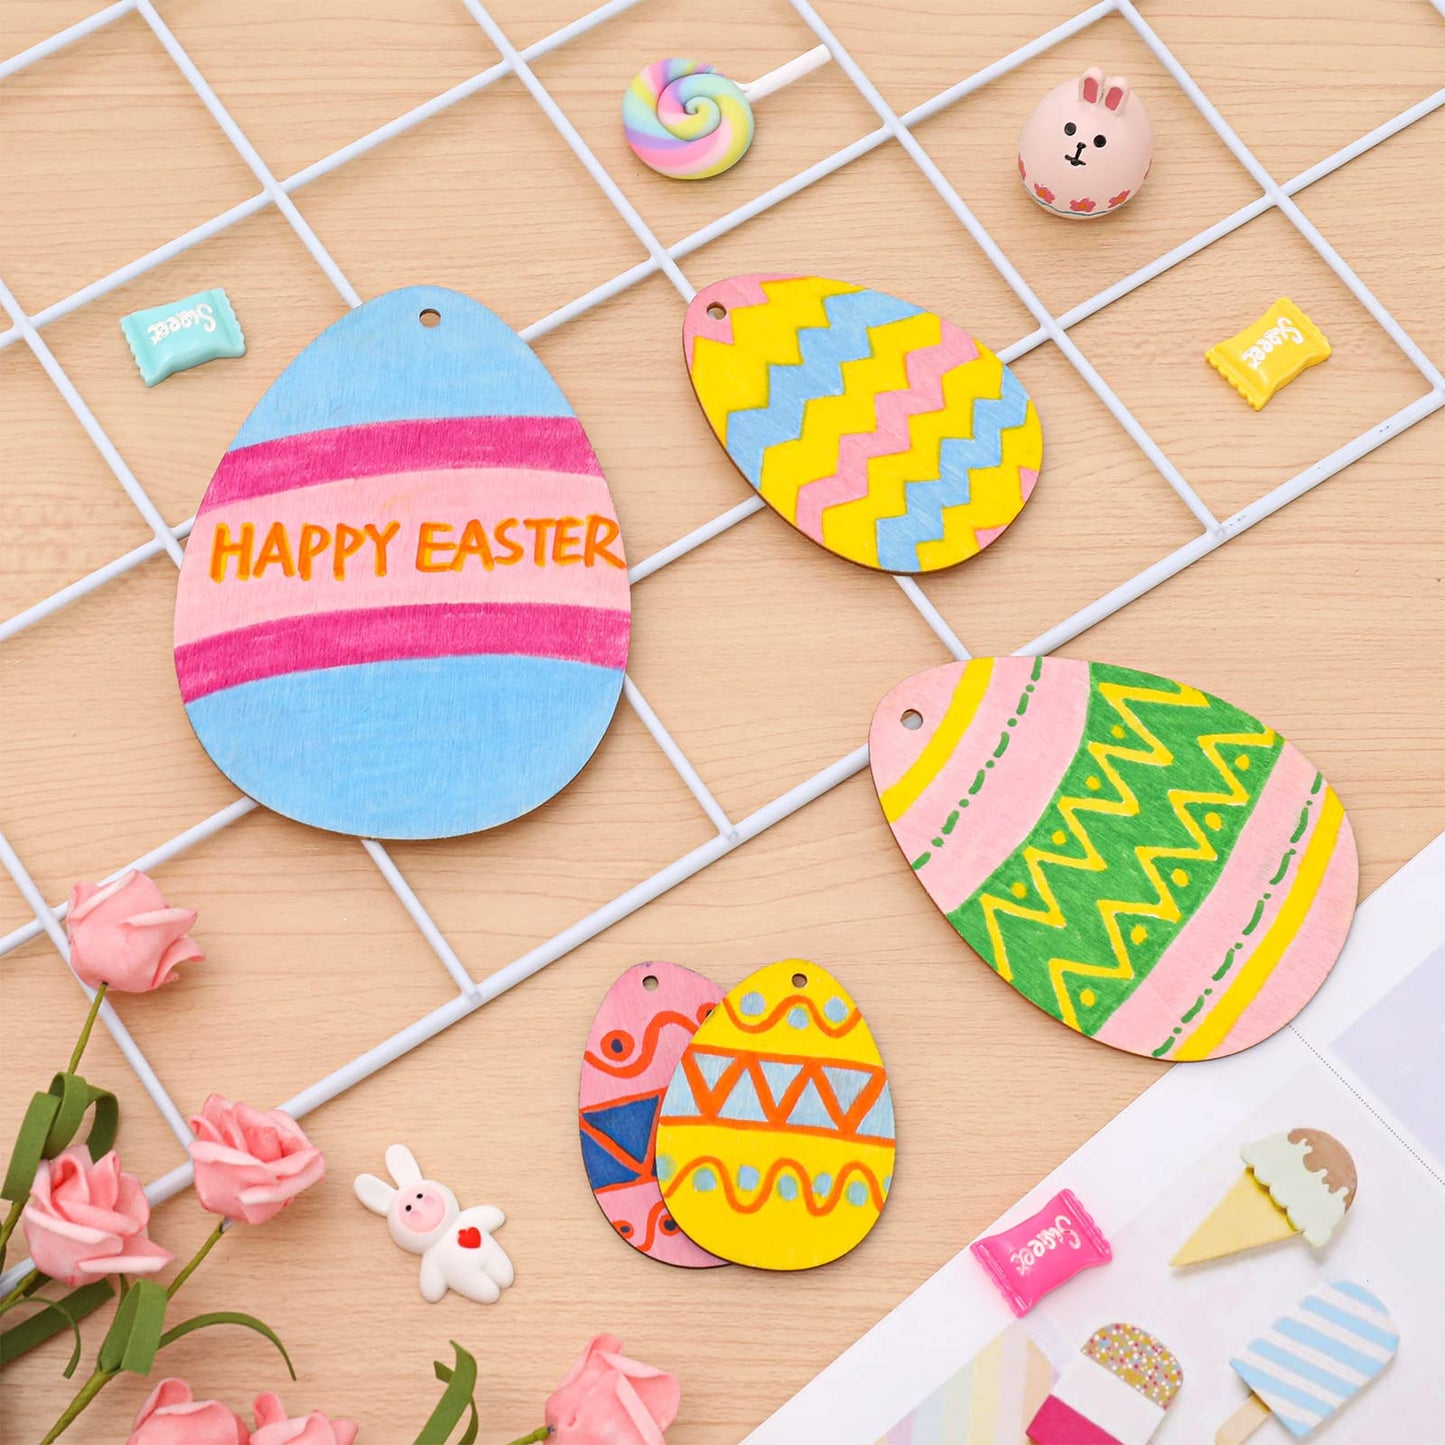 Whaline 40Pcs Easter Egg Wooden Cutouts with Hemp Rope Easter Egg Unfinished Wood Ornaments Egg Shaped Blank Wooden Slices for Easter Spring Home